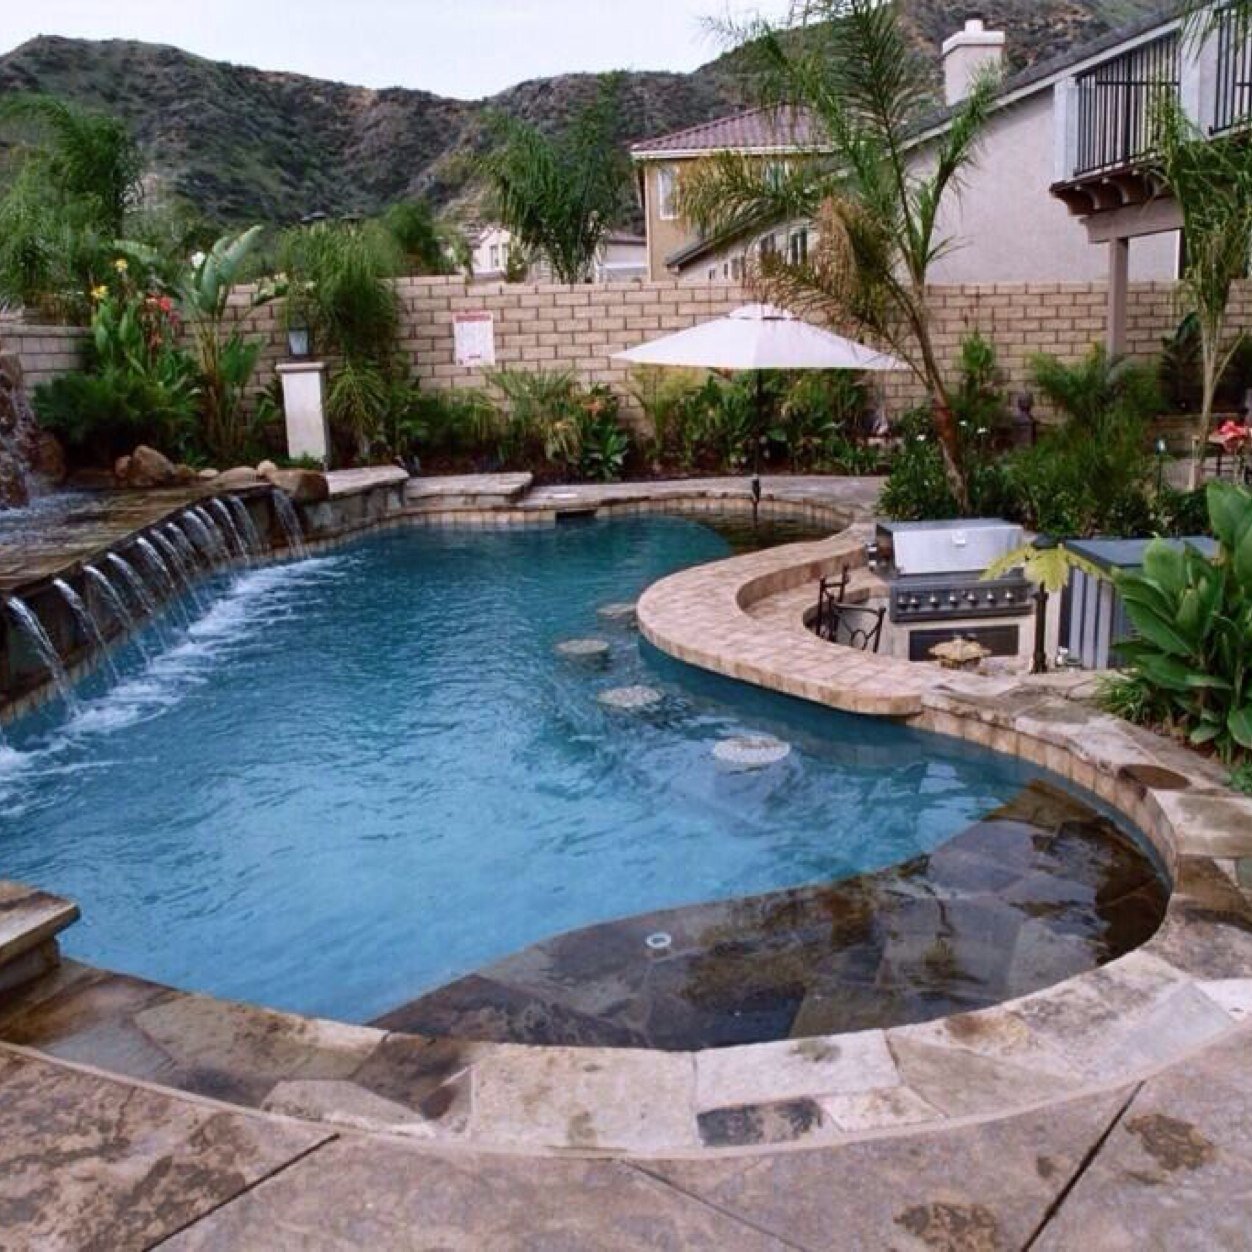 Family owned & operated pool service Servicing the Valley for 30 years